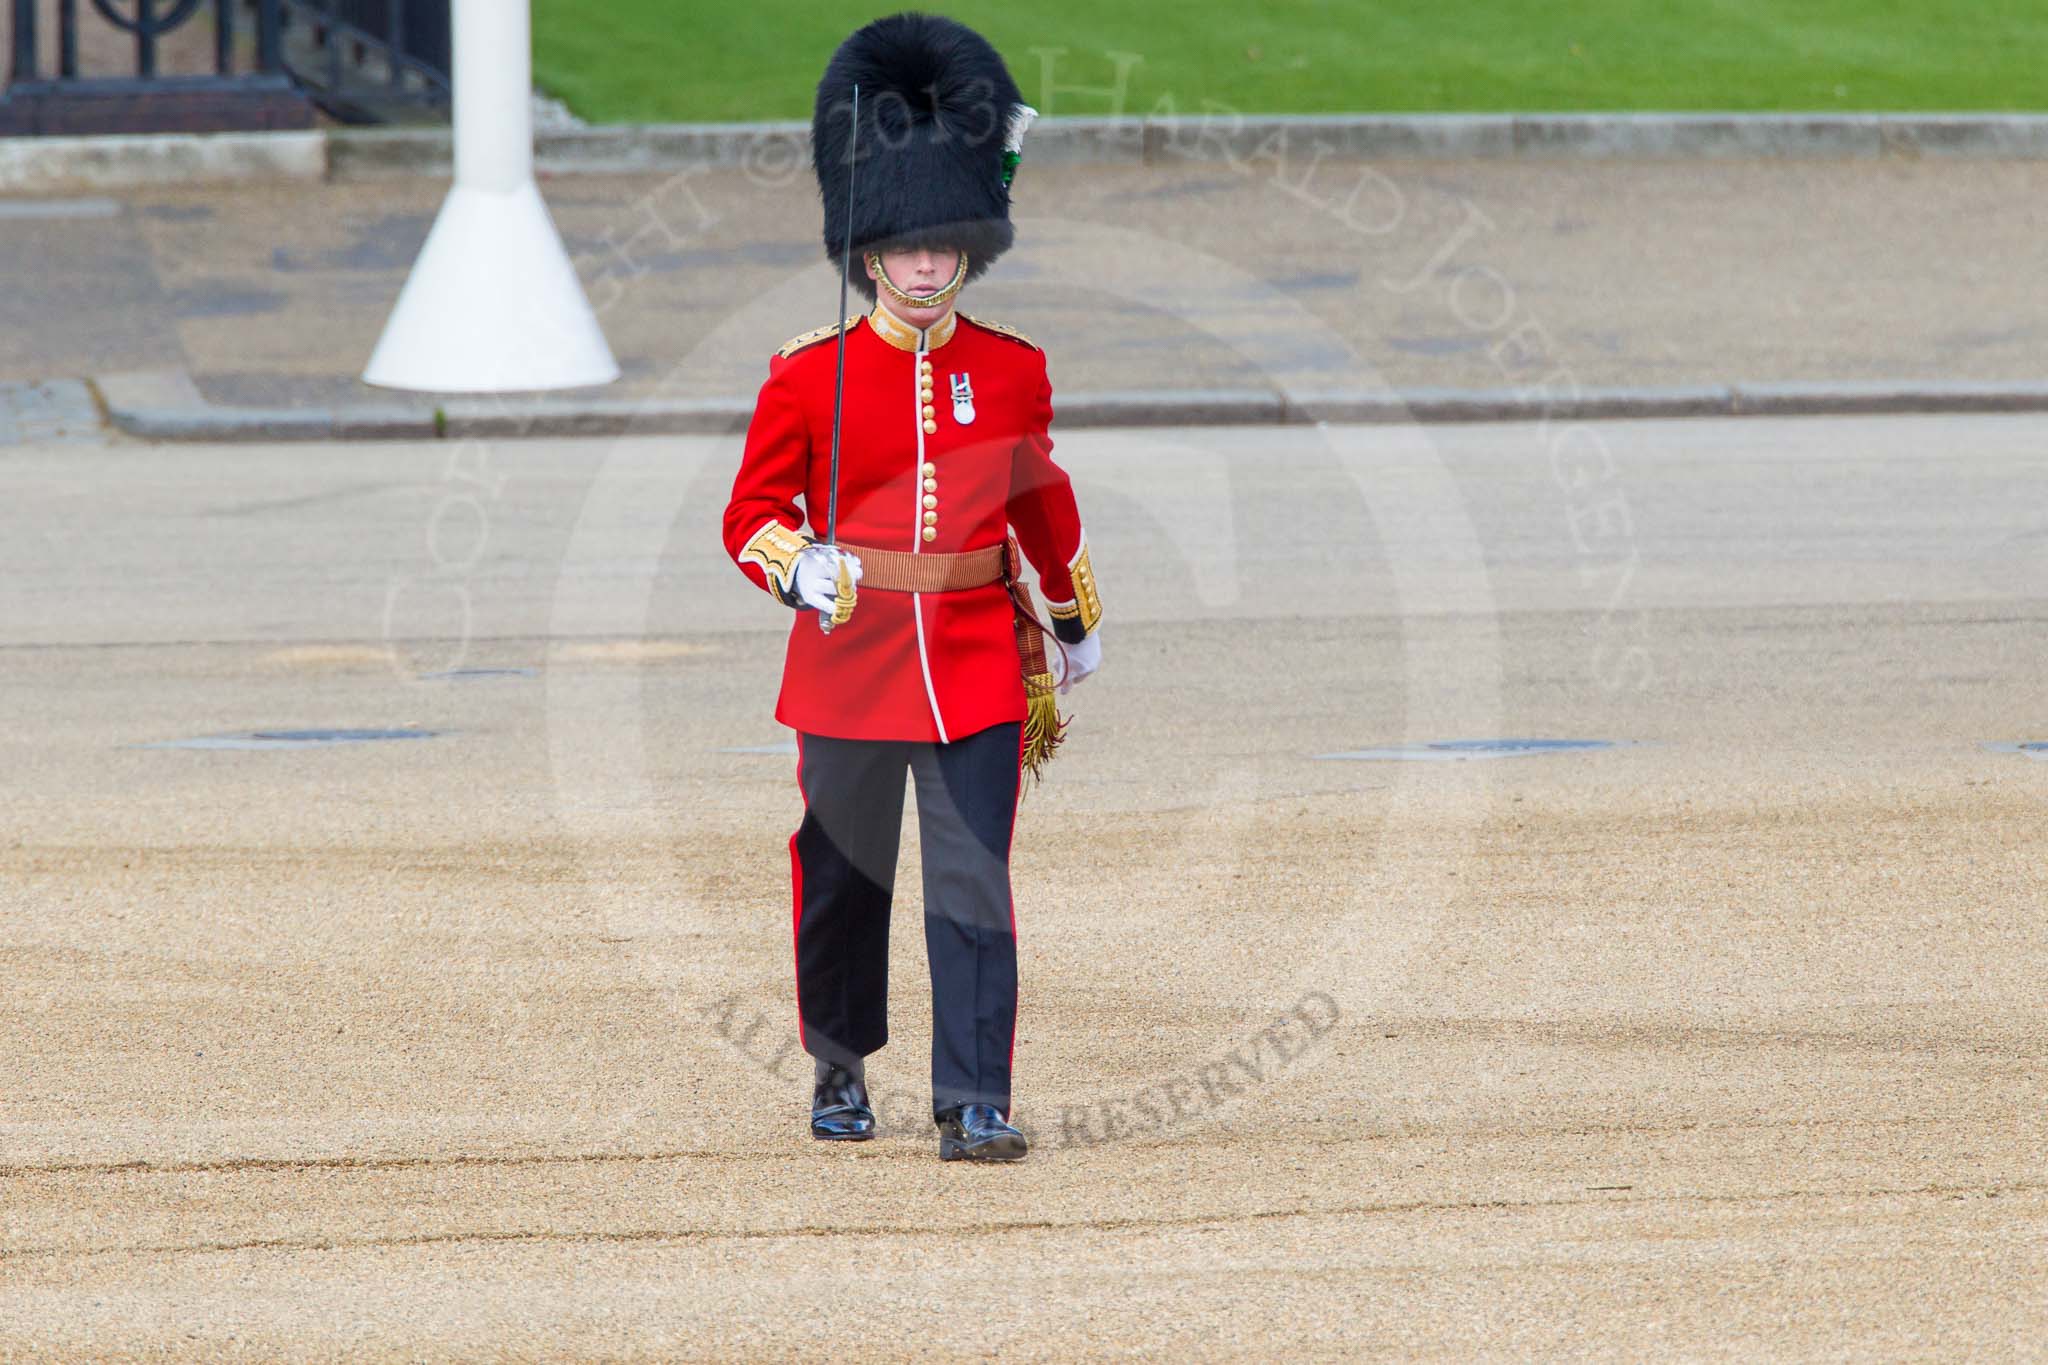 The Colonel's Review 2013: The Subaltern of No. 2 Guard, Captain B Bardsley..
Horse Guards Parade, Westminster,
London SW1,

United Kingdom,
on 08 June 2013 at 10:33, image #146